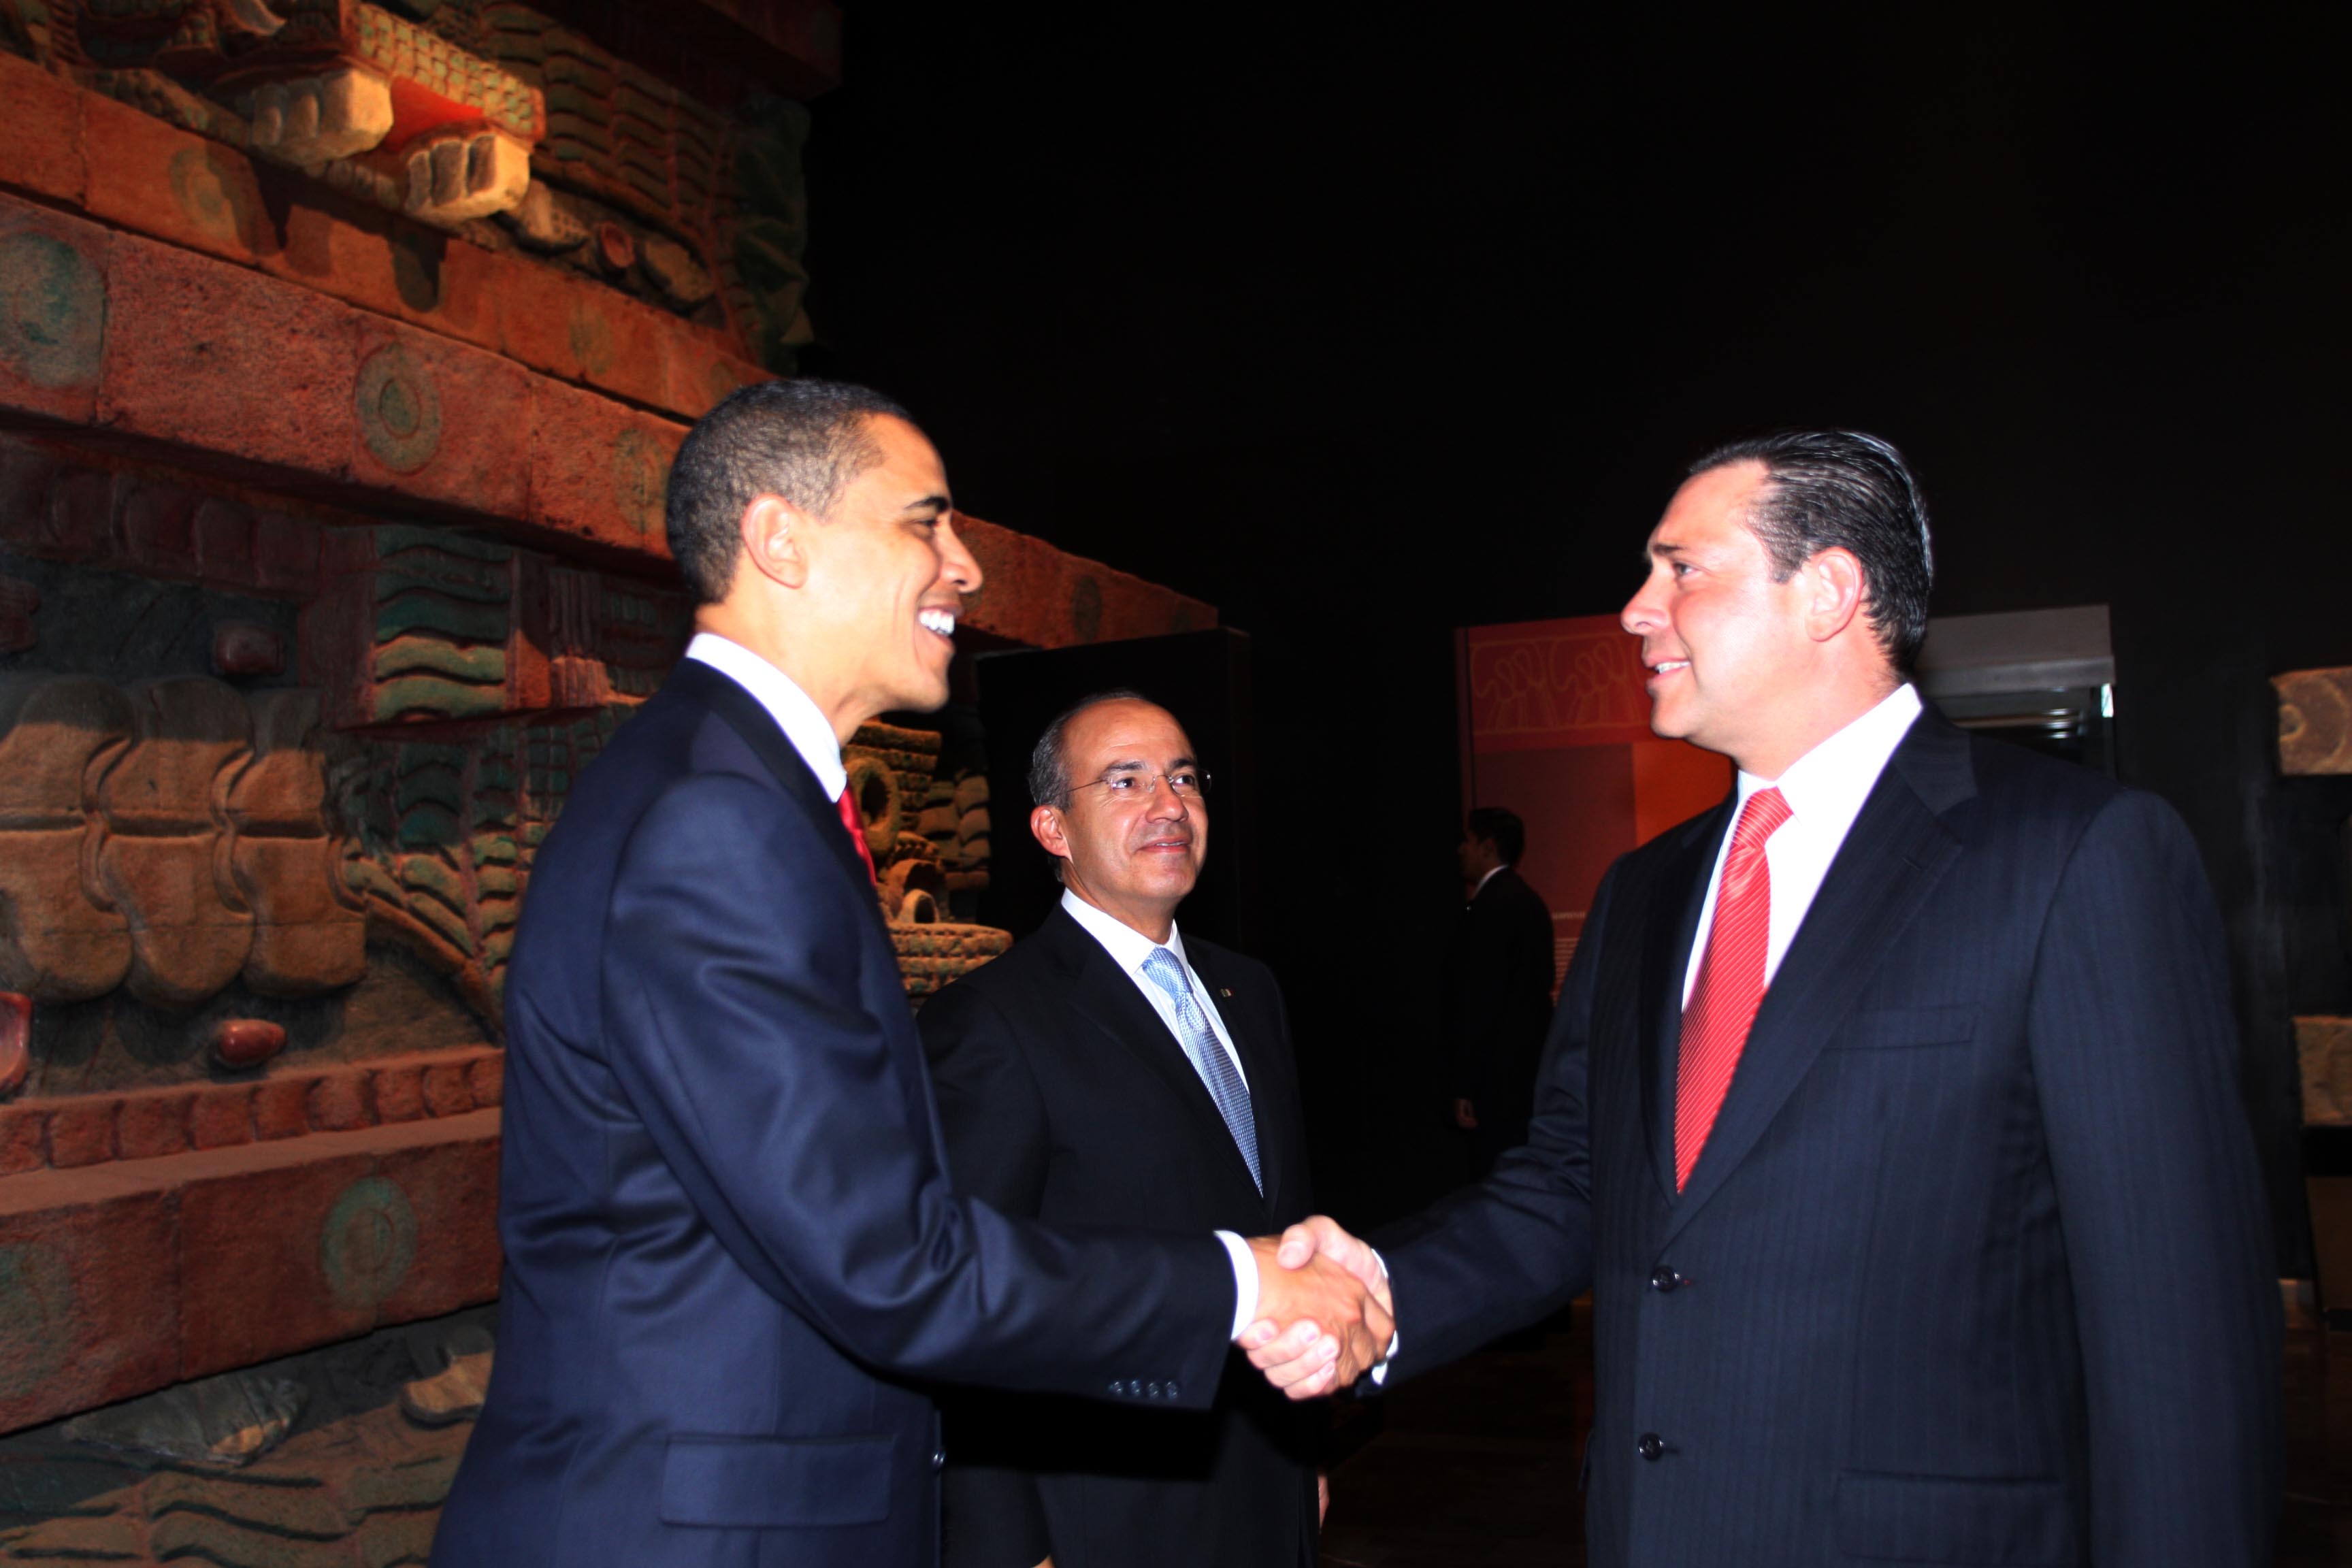 Eugenio Hernandez Flores (R), governor of the northern border state of Tamaulipas from 2005 to 2010, faces trial in a U.S. federal court.